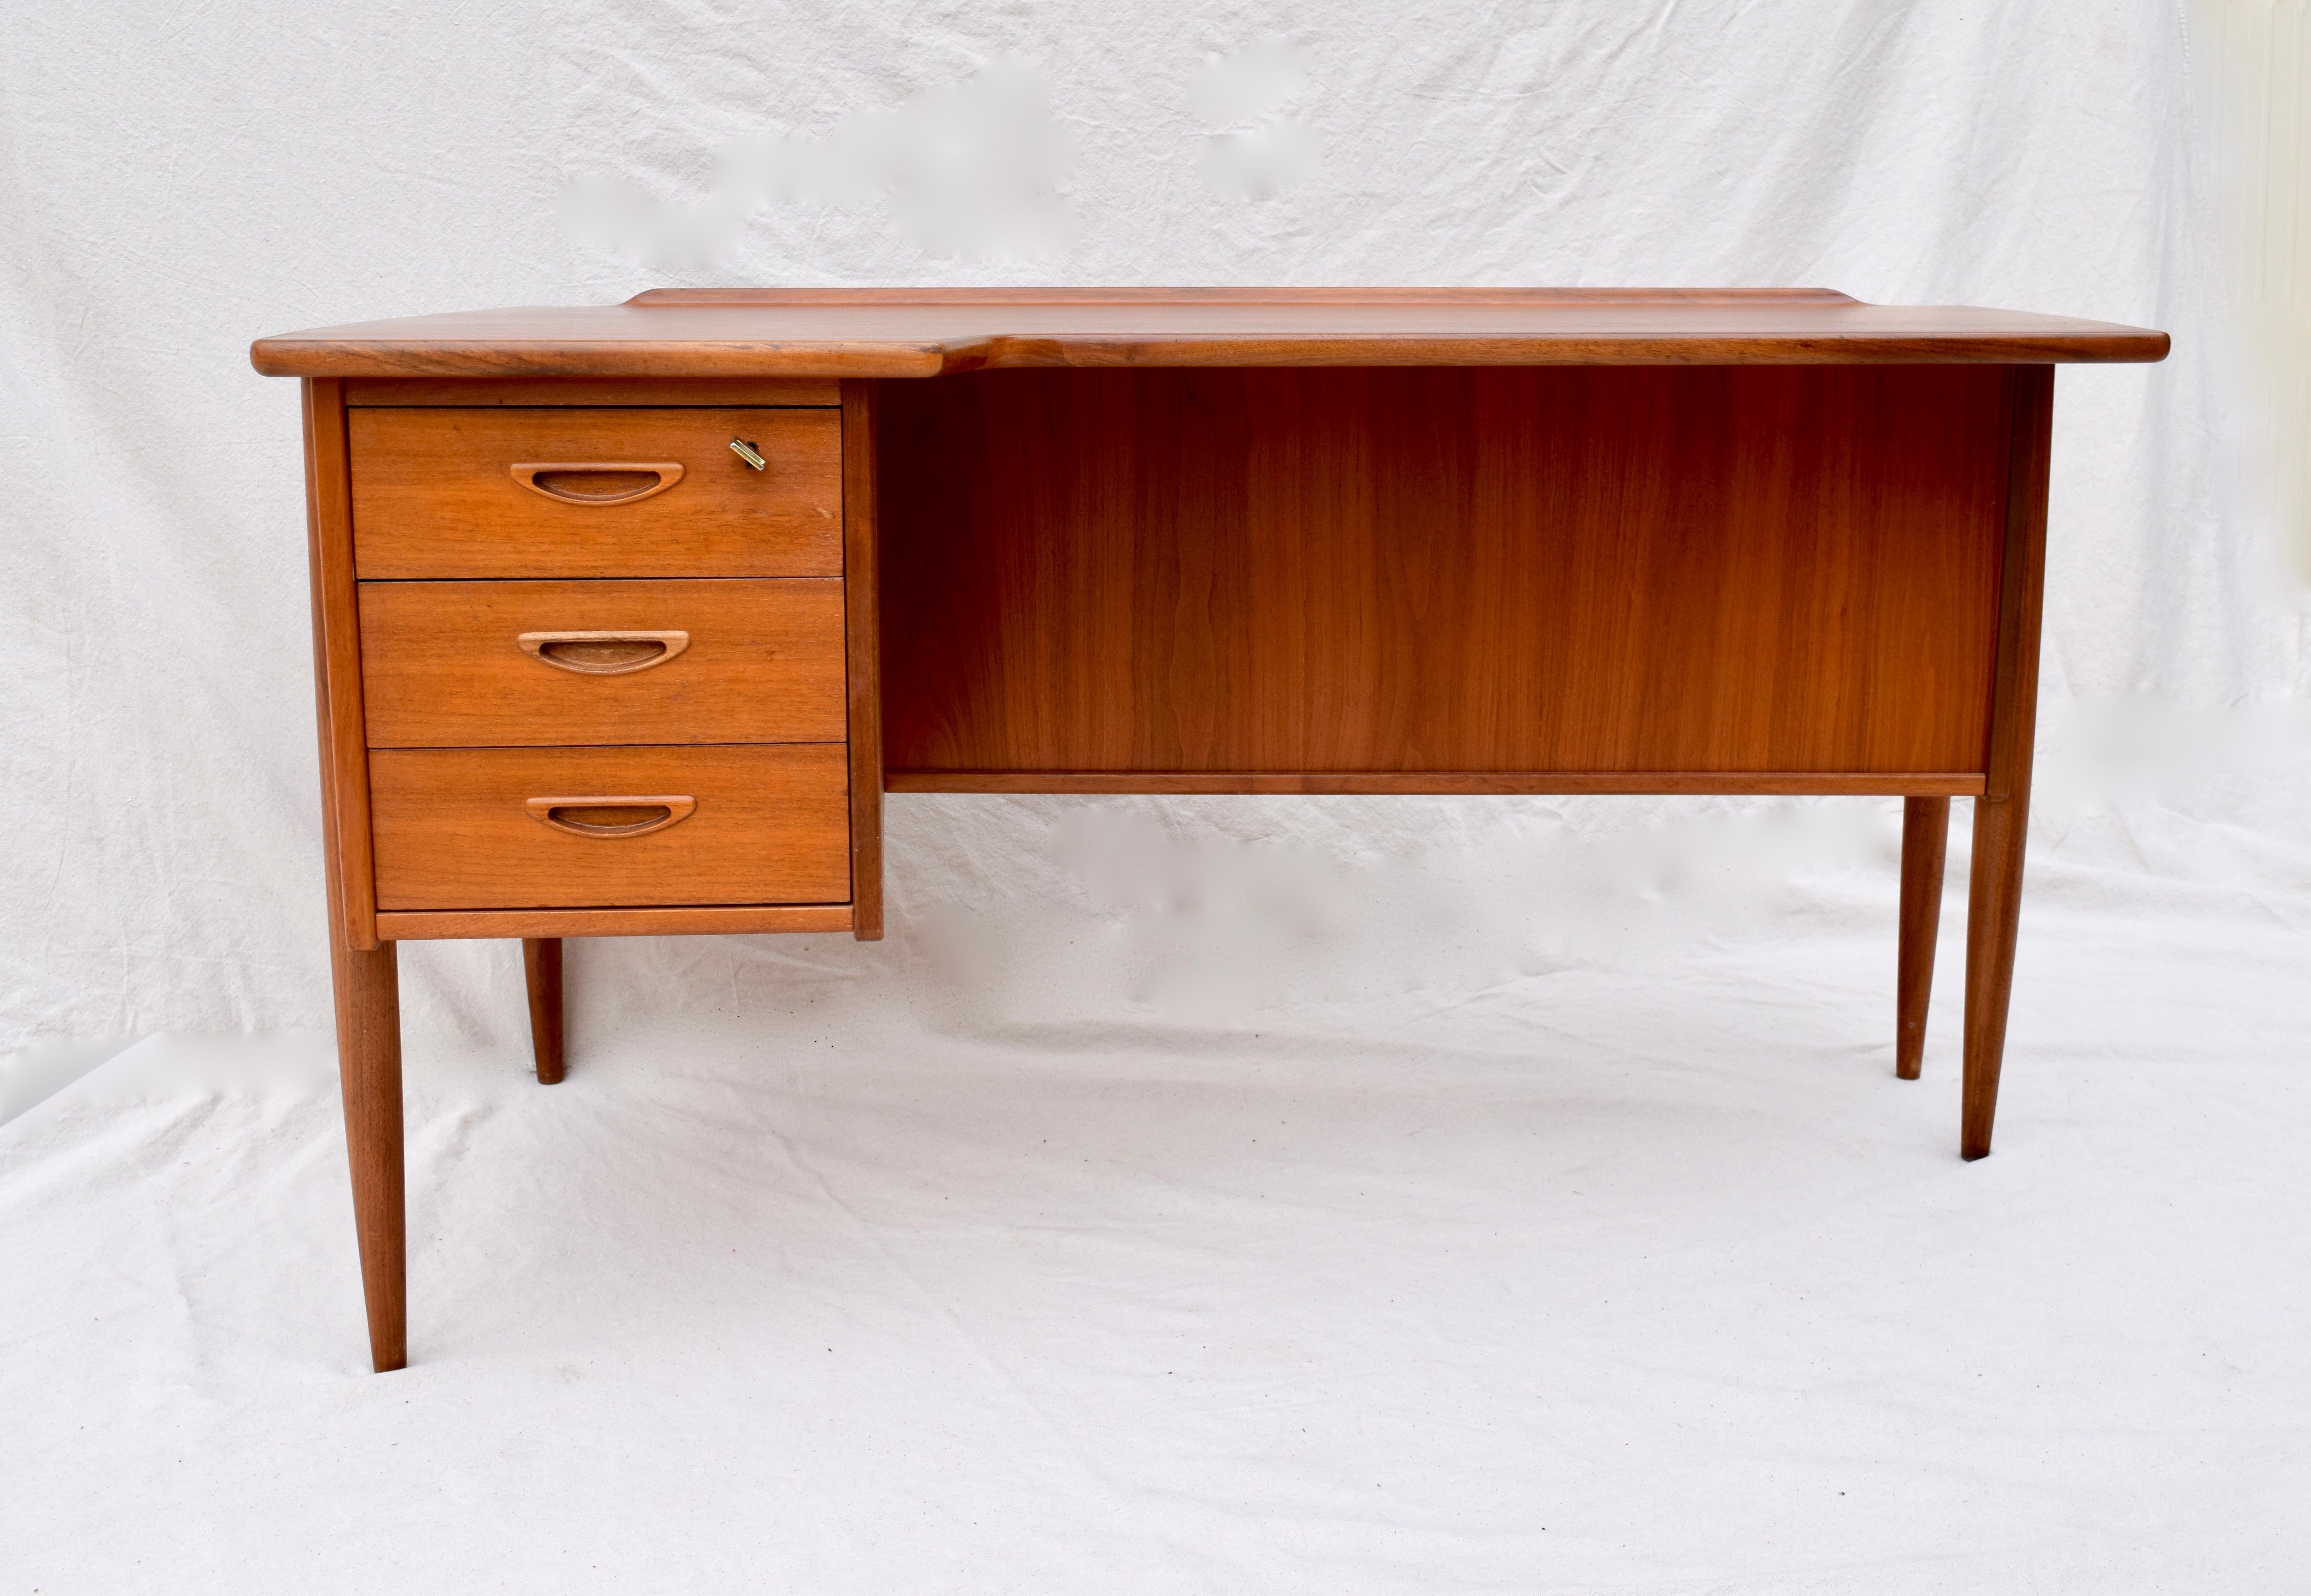 Teak boomerang multifunctional desk designed by Peter Løvig Nielsen, circa 1960. Original finish and keys (2) with working locks, three dovetailed drawers with inlaid handles, drop door cupboard and shelving to the back.